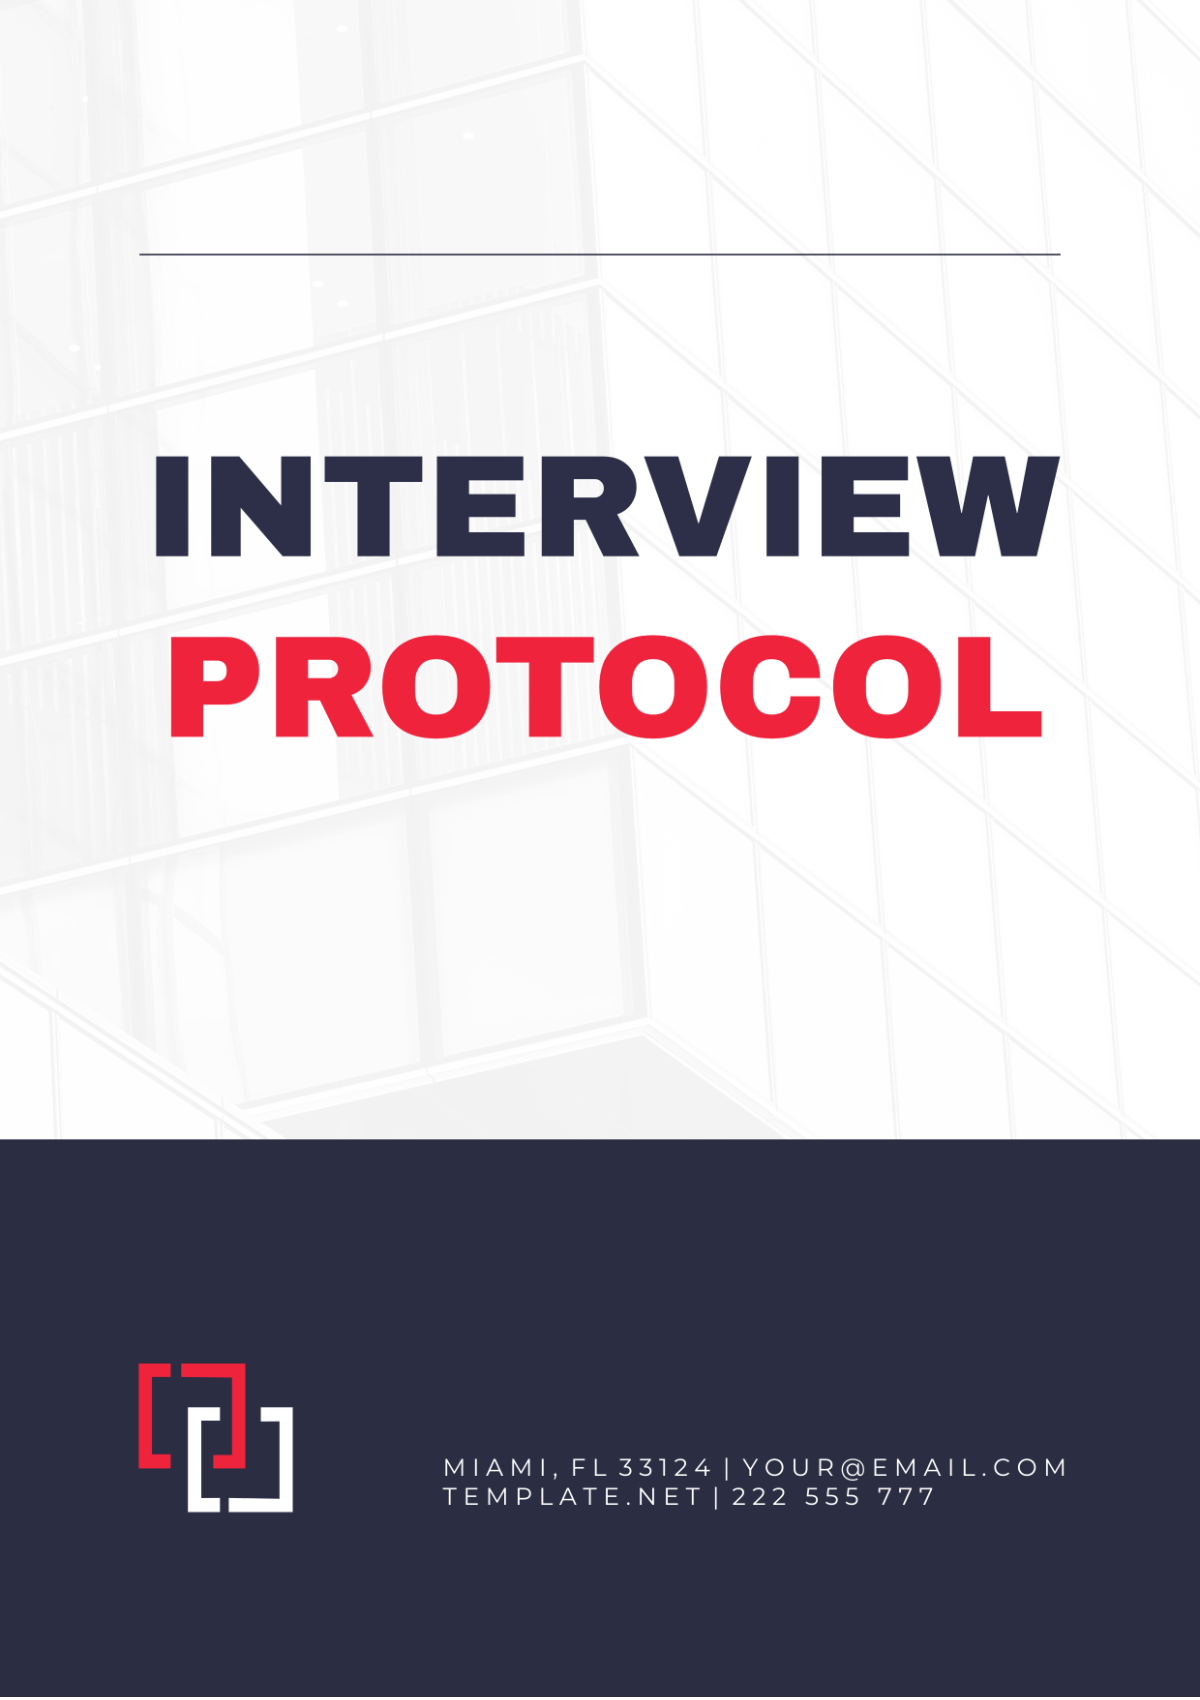 Interview Protocol Template